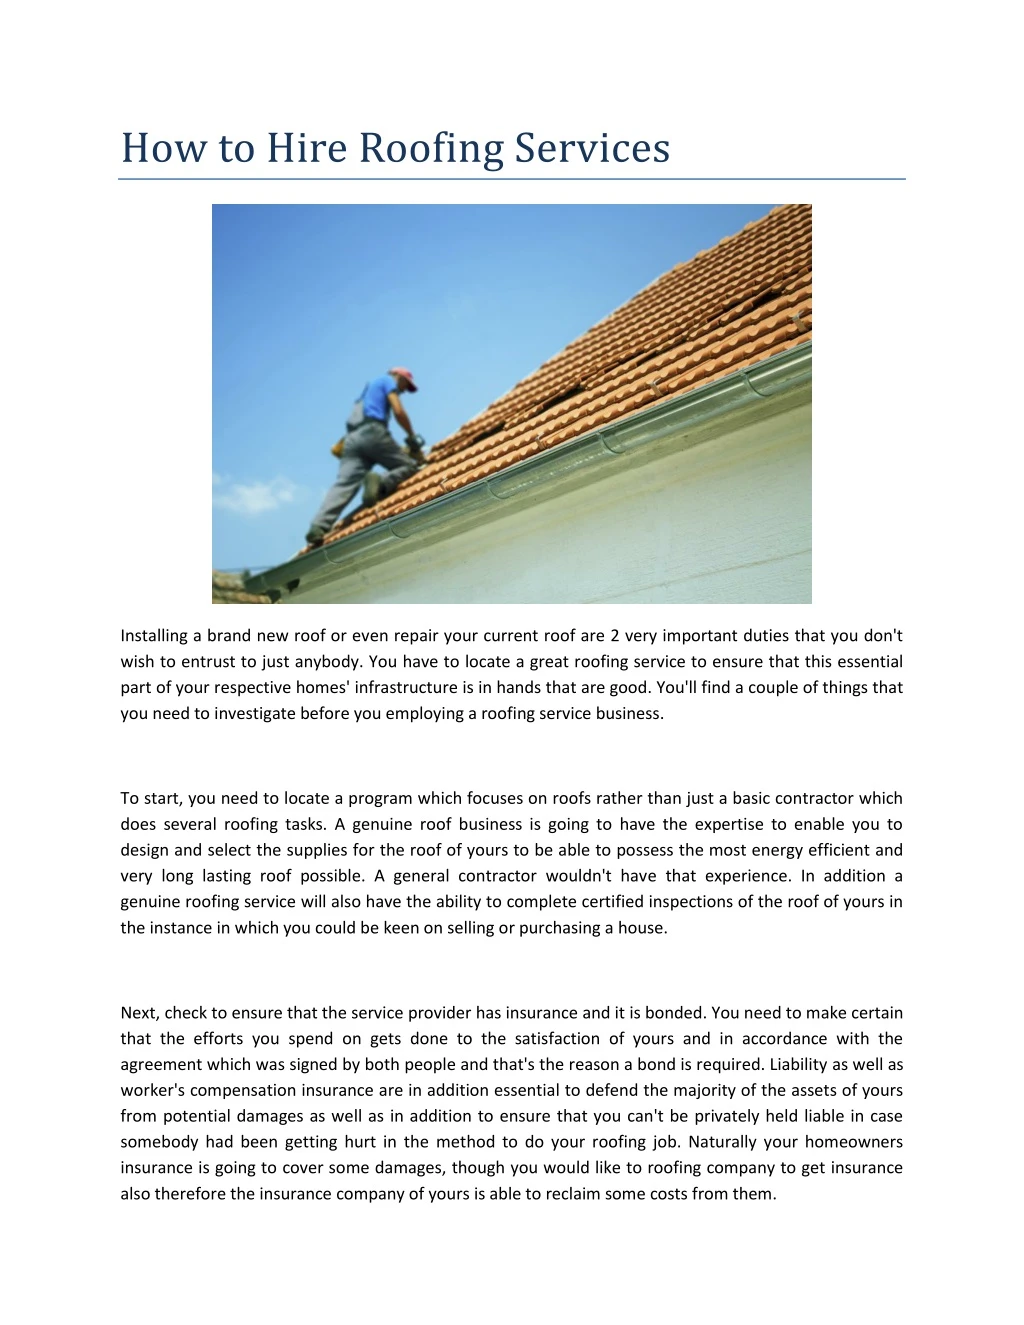 how to hire roofing services